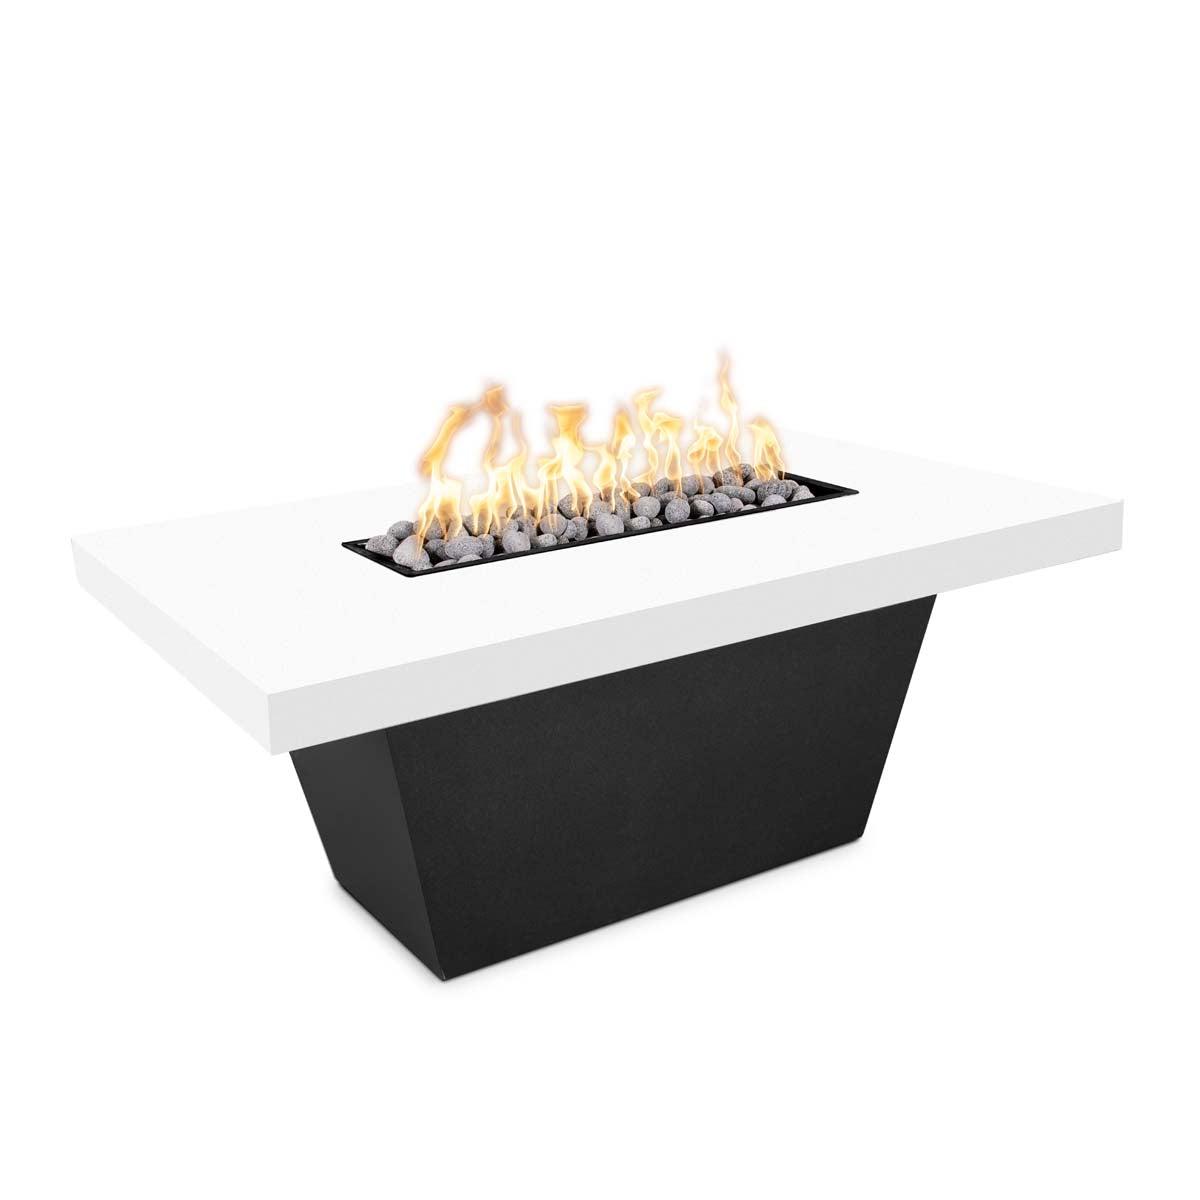 The Outdoor Plus Tacoma 48" Black & White Powder Coated Metal Liquid Propane Fire Table with Match Lit with Flame Sense Ignition